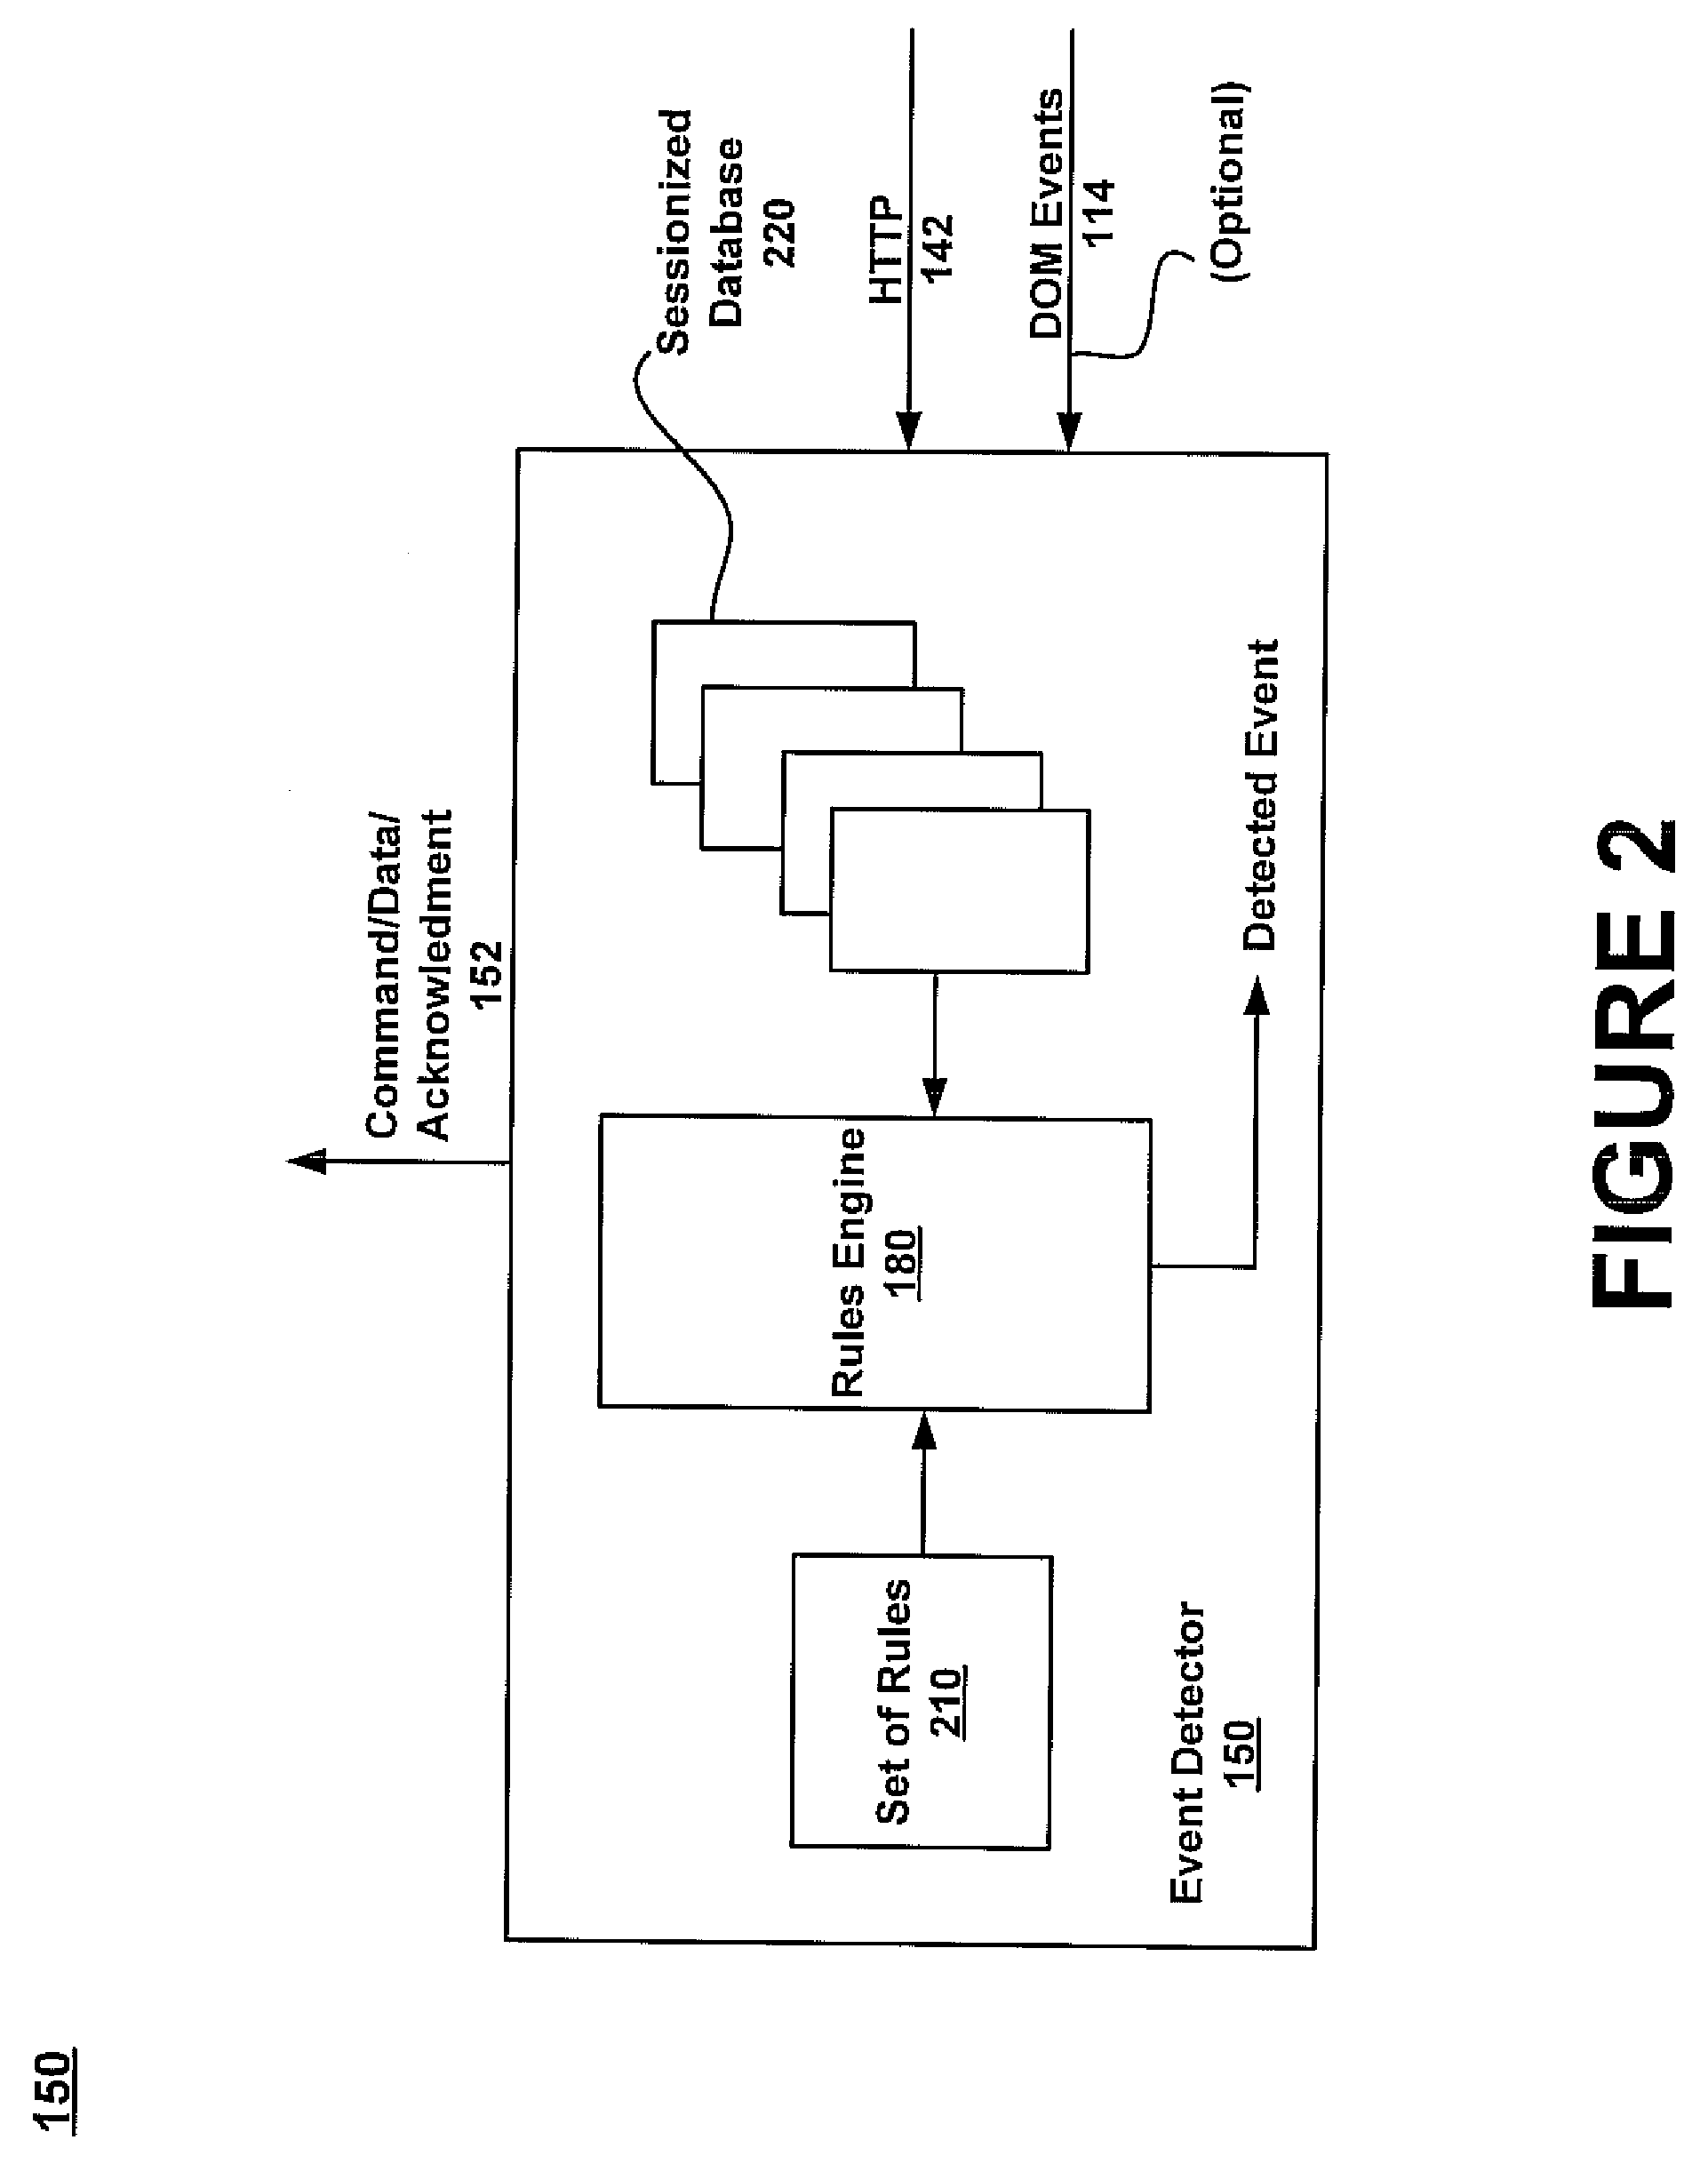 Method and system for communication between a client system and a server system